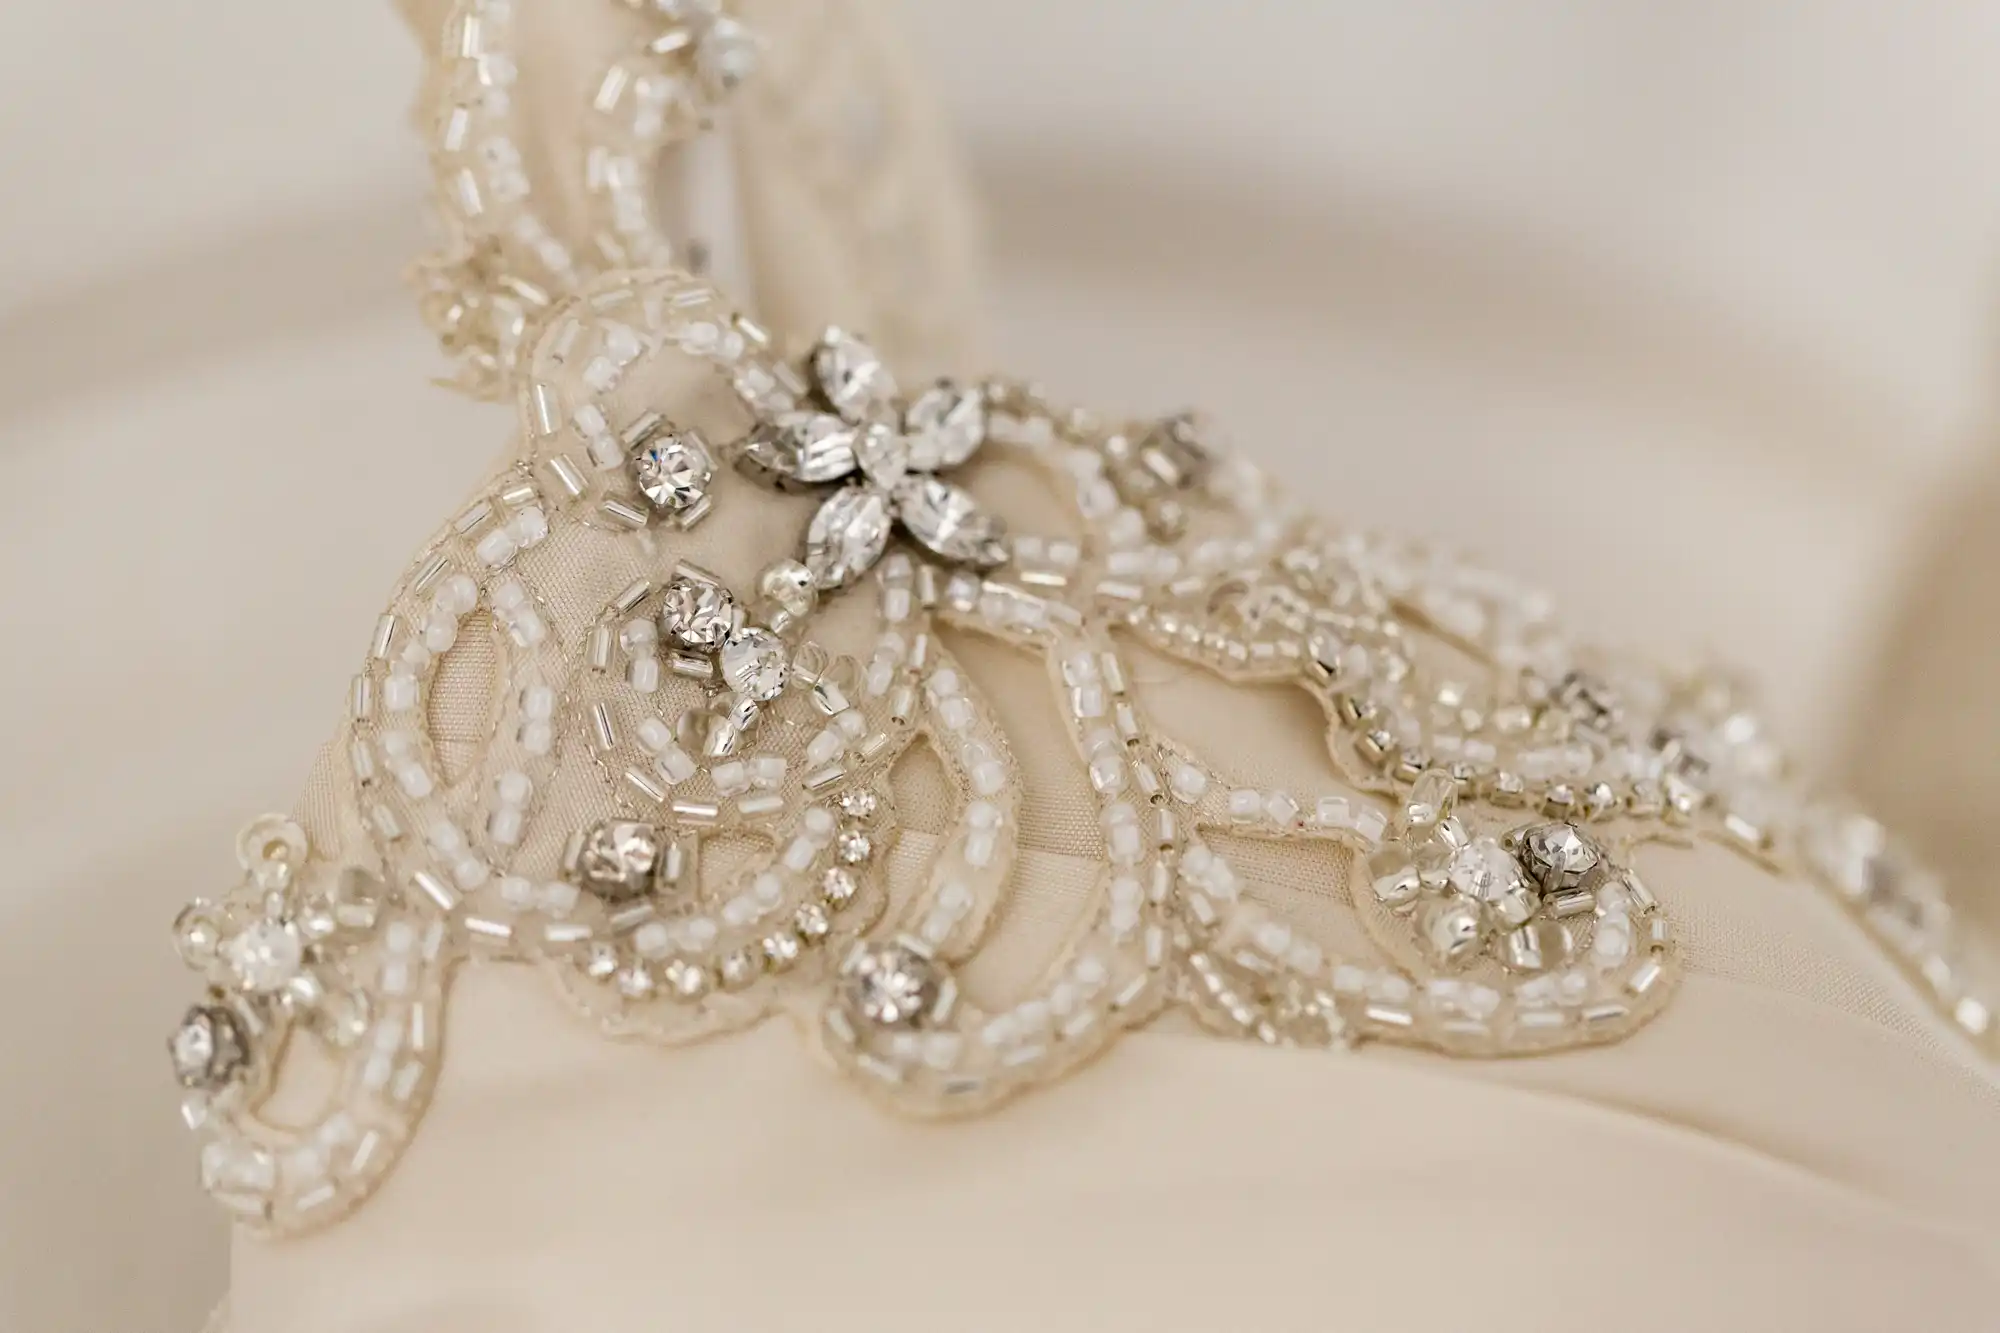 Close-up of an intricate bridal headpiece with delicate beadwork and crystal embellishments on a beige fabric.